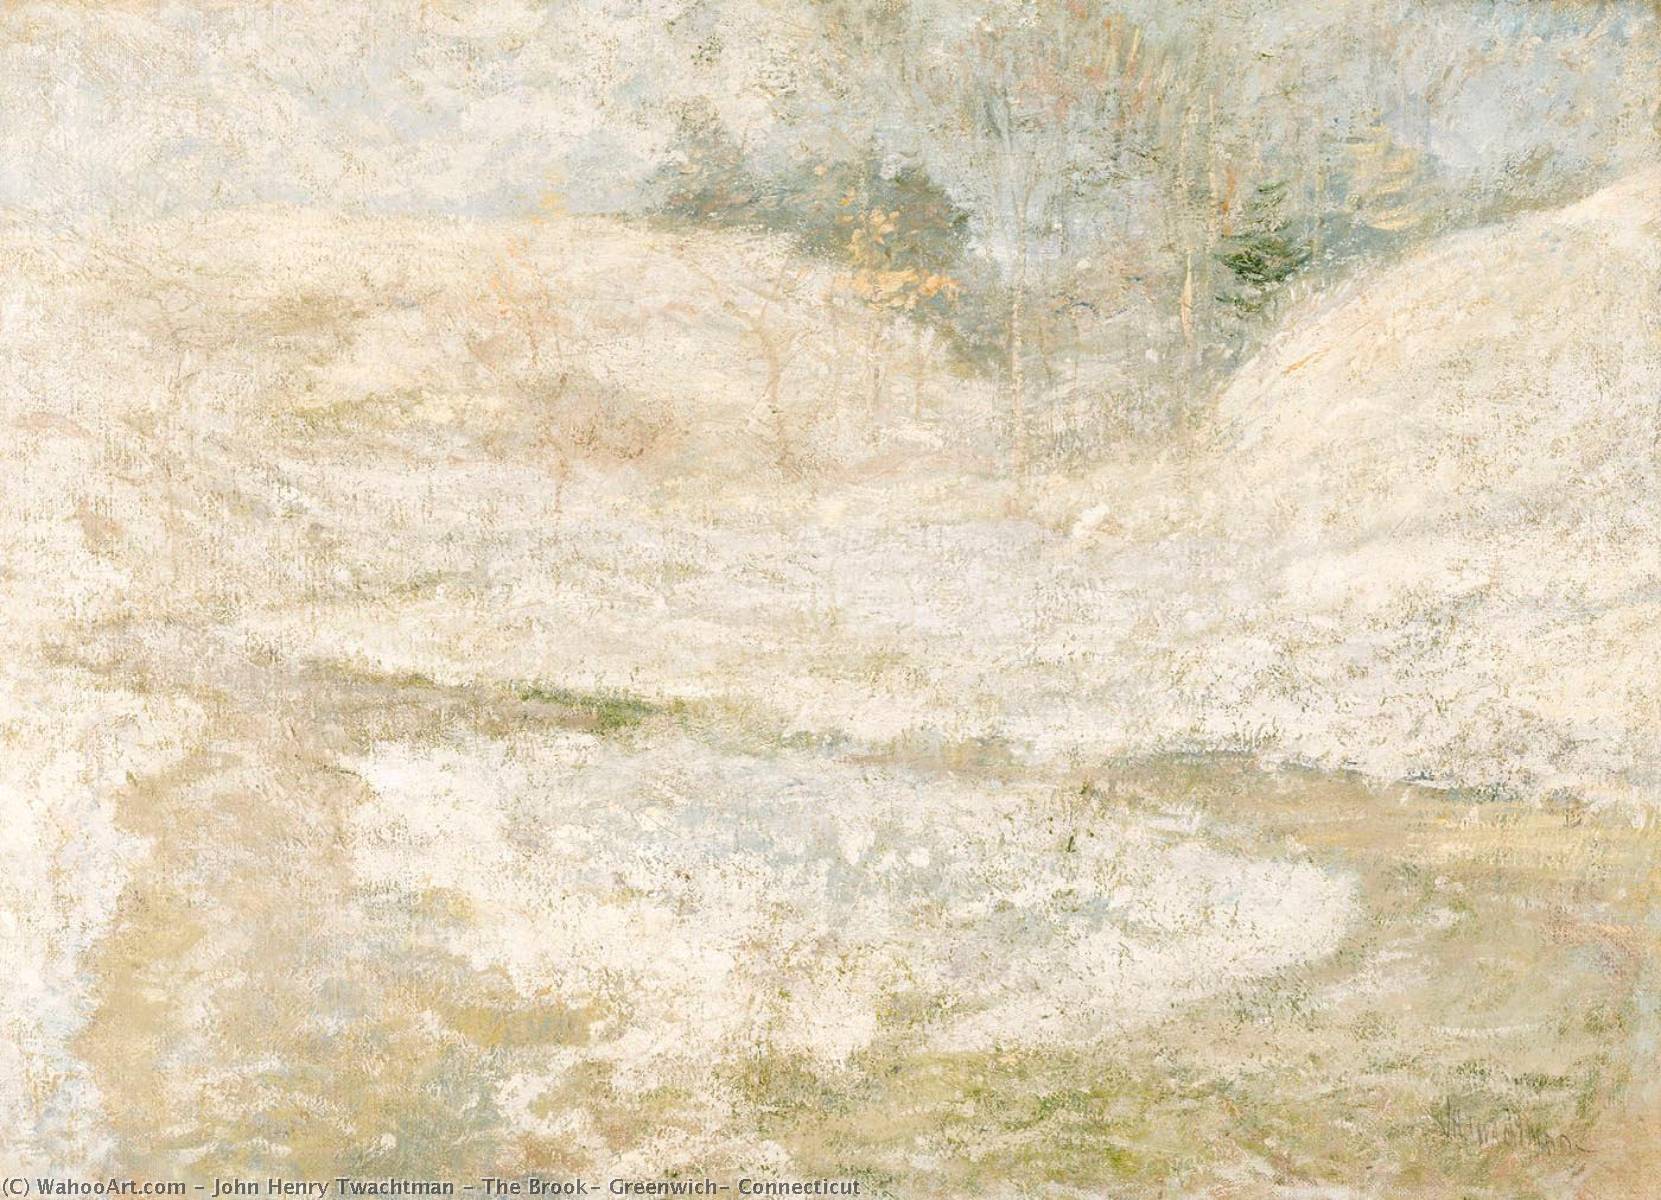 Buy Museum Art Reproductions The Brook, Greenwich, Connecticut, 1900 by John Henry Twachtman (1853-1902, United States) | ArtsDot.com